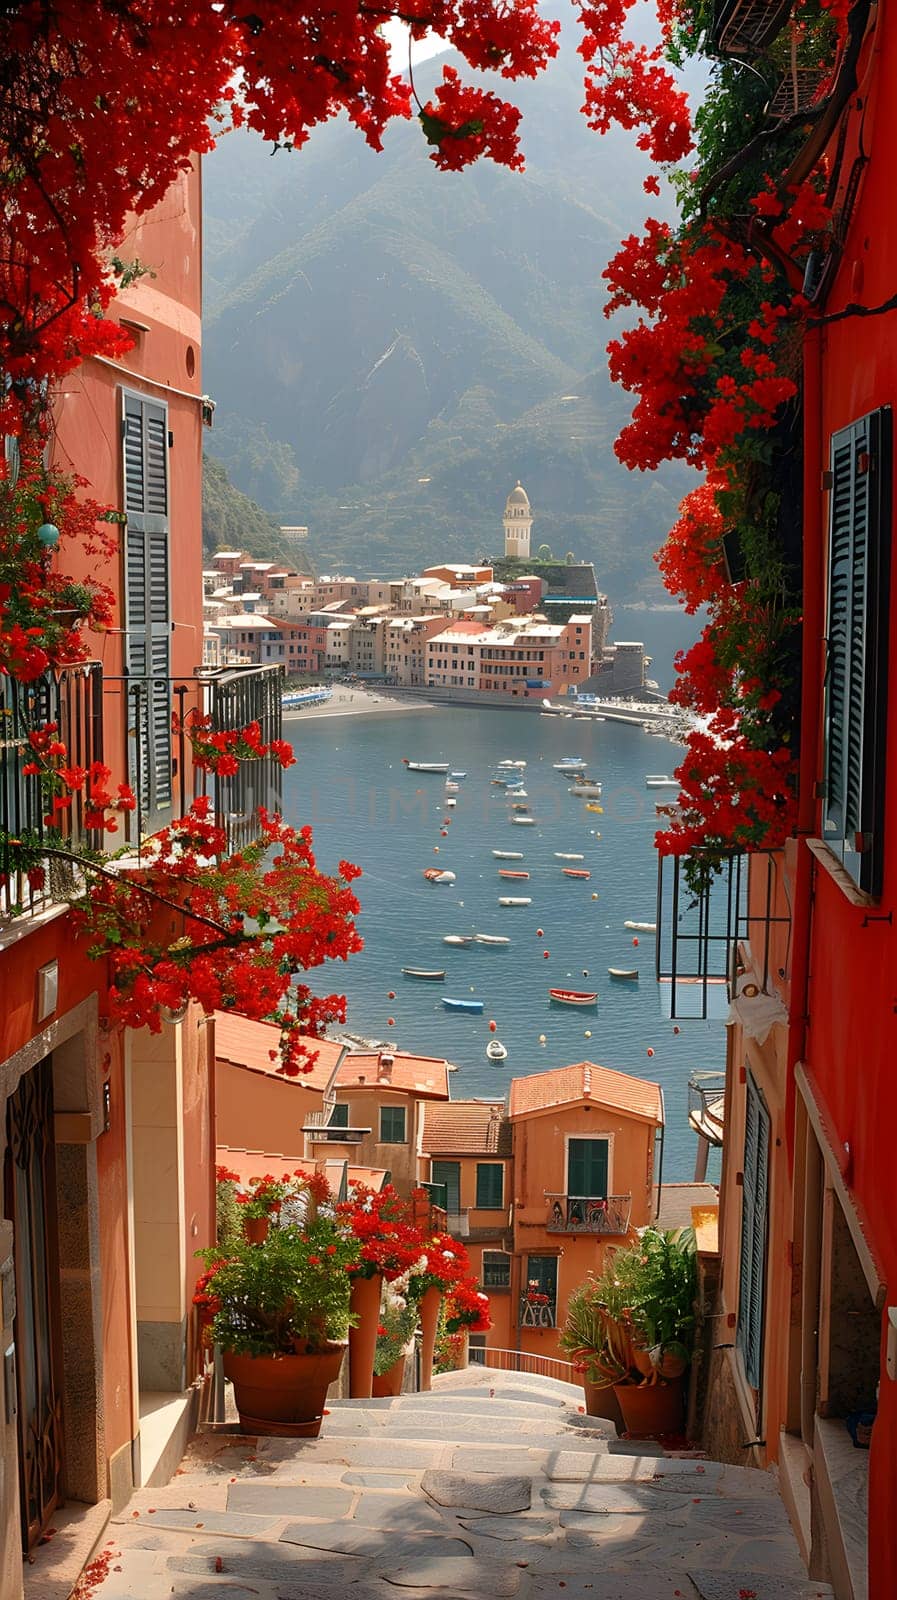 A charming narrow street in a picturesque neighborhood lined with red flowers and buildings, with boats gently floating in the water below on a peaceful morning in the city